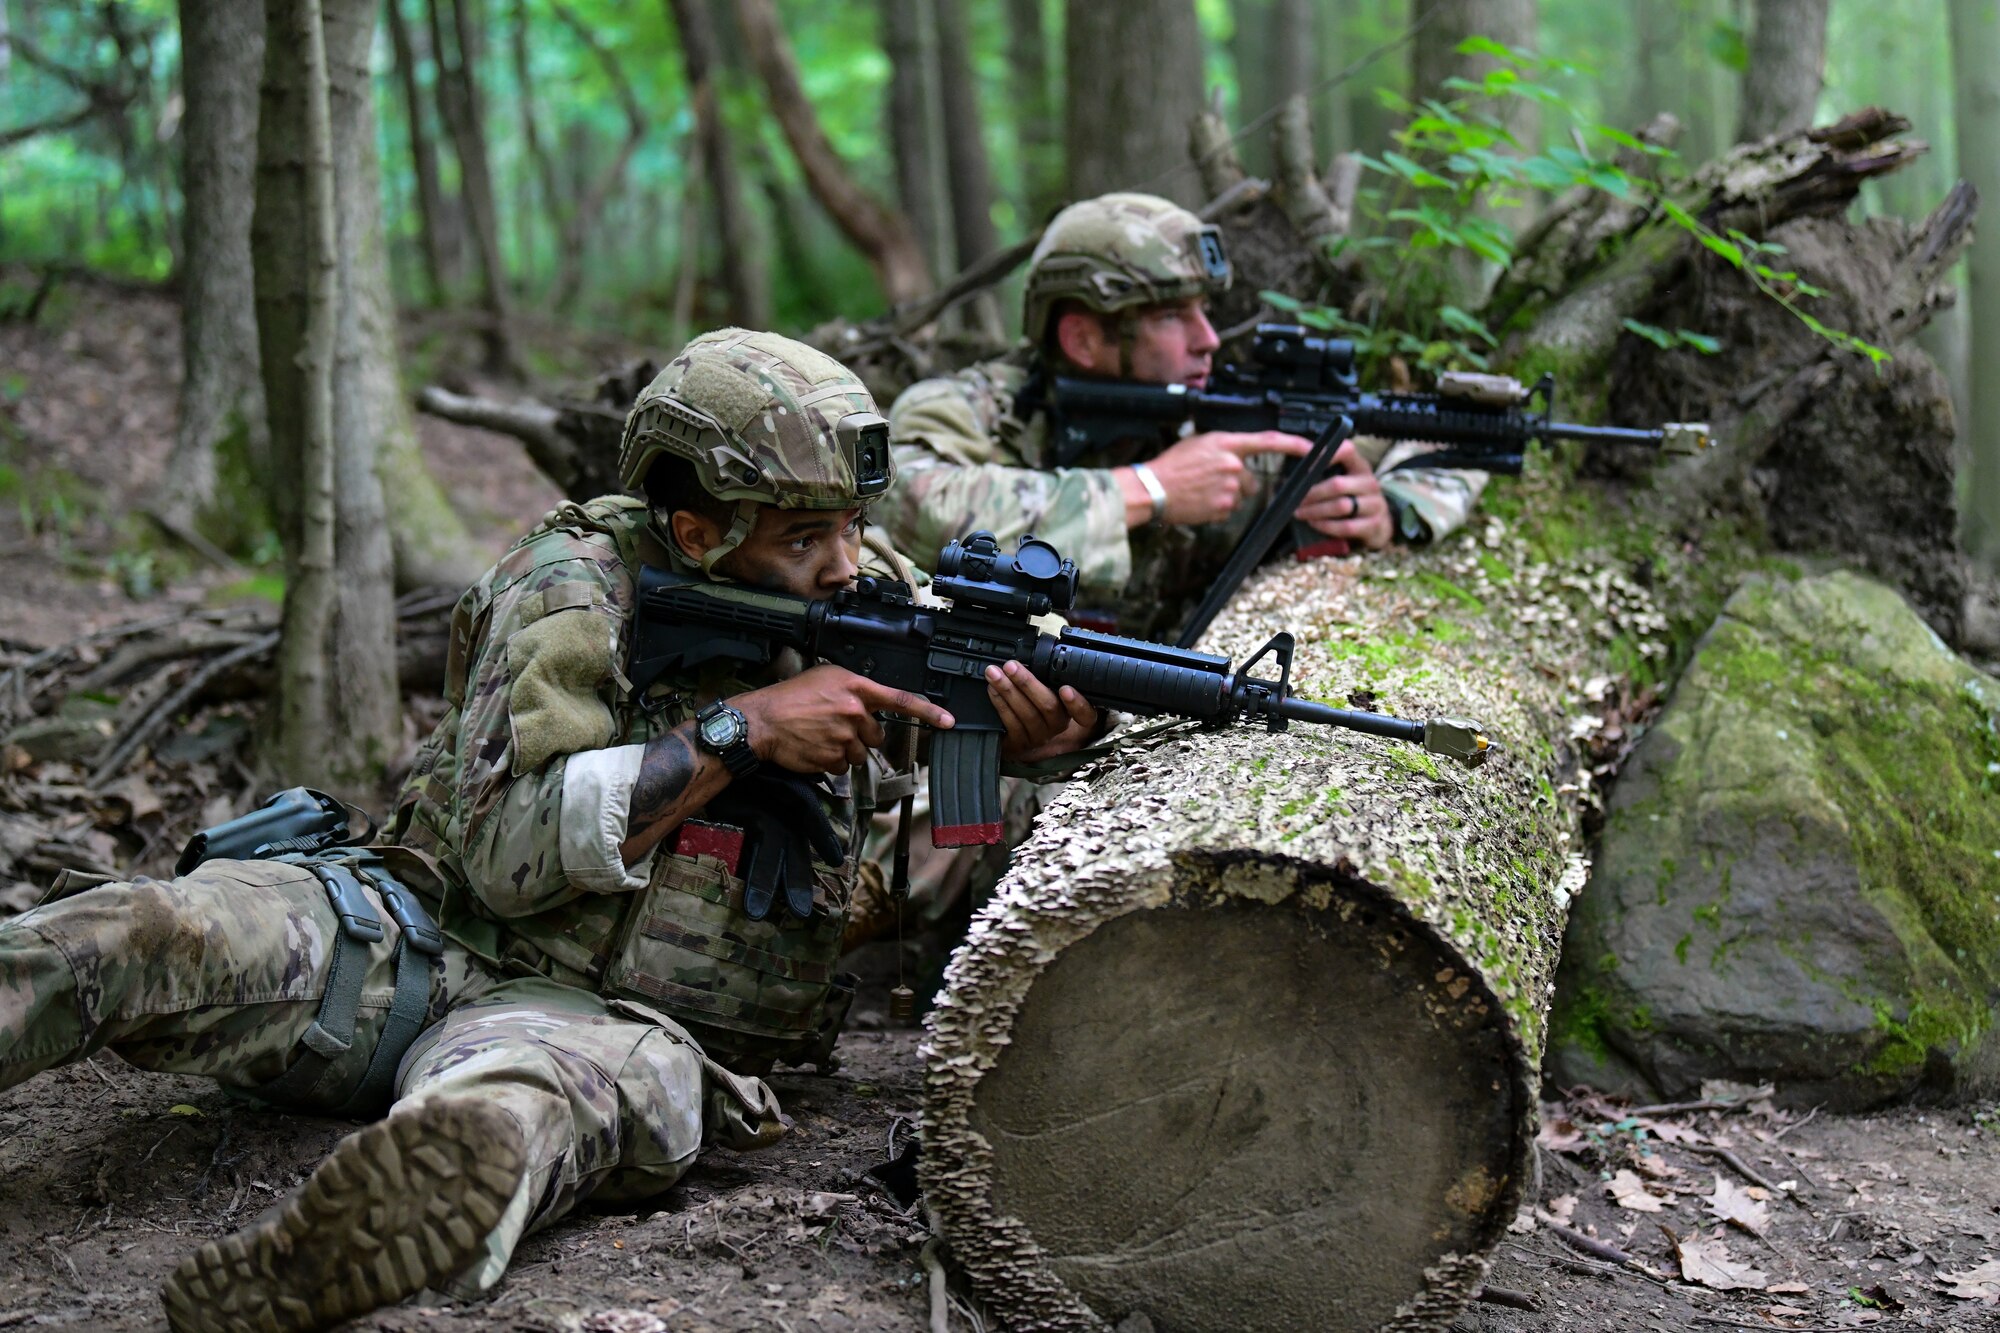 Staff Sgt. Jiquevious Miller and Master Sgt. Justin Waternman, Integrated Defense Leadership Course students assigned to the 307th Security Forces Squadron, Barksdale Air Force Base, Louisiana, watch for movement during a static defense exercise at Camp James A. Garfield Joint Military Training Center, Ohio, July 27, 2022.